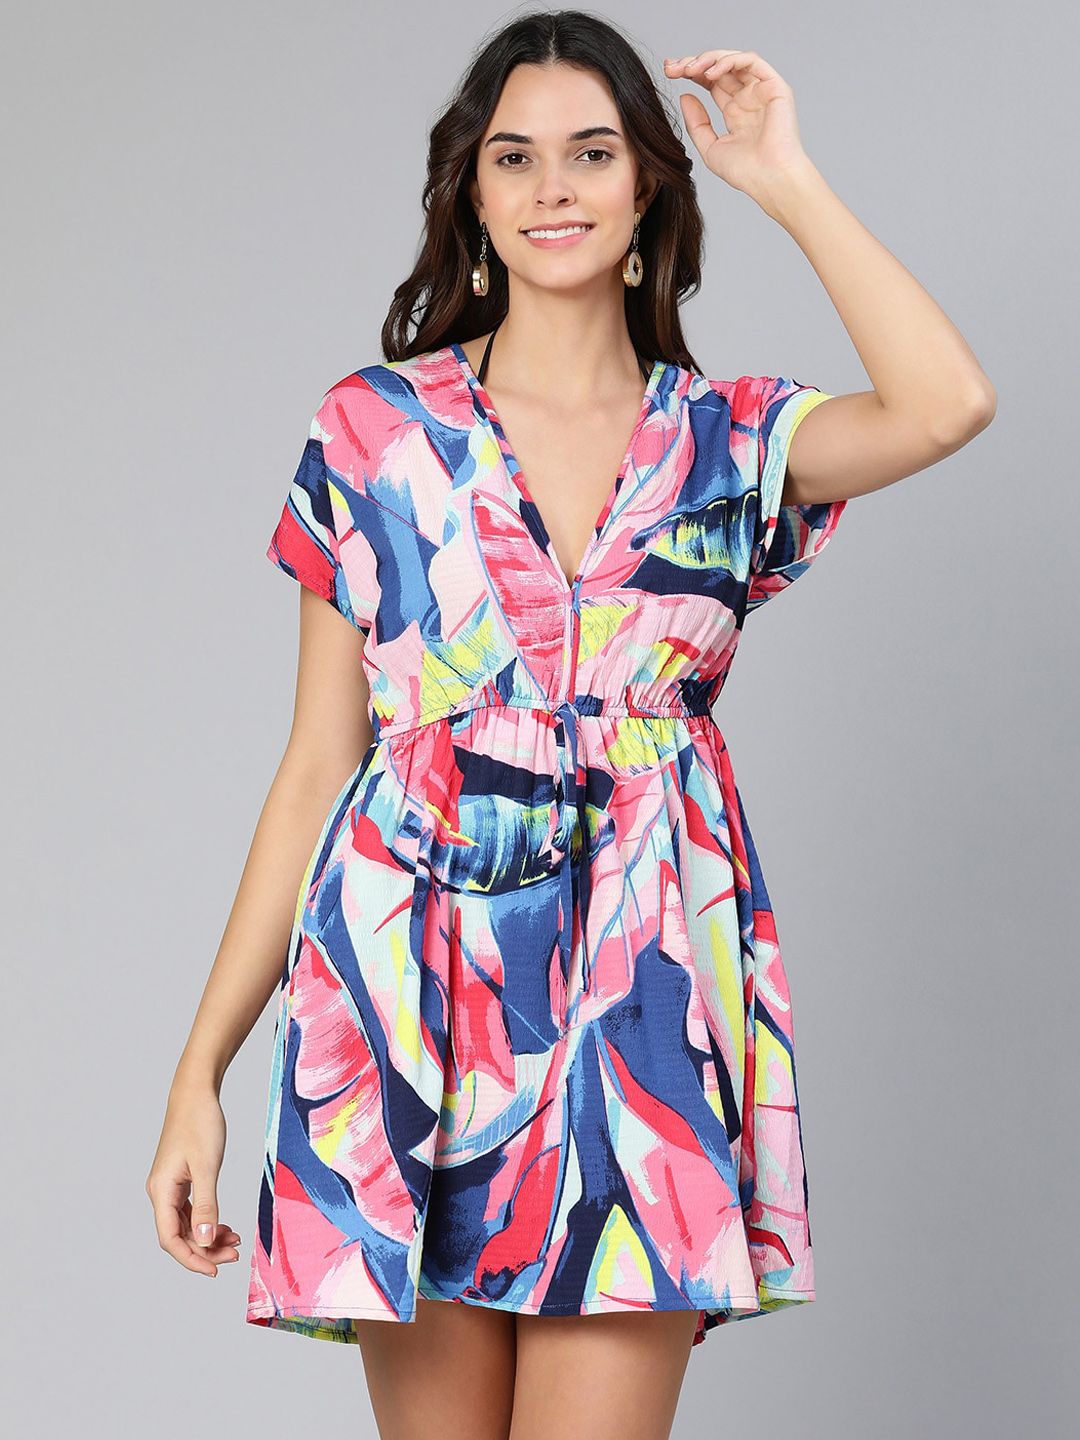 Oxolloxo Women Blue & Pink Printed Cover-Up Swim Dress Price in India